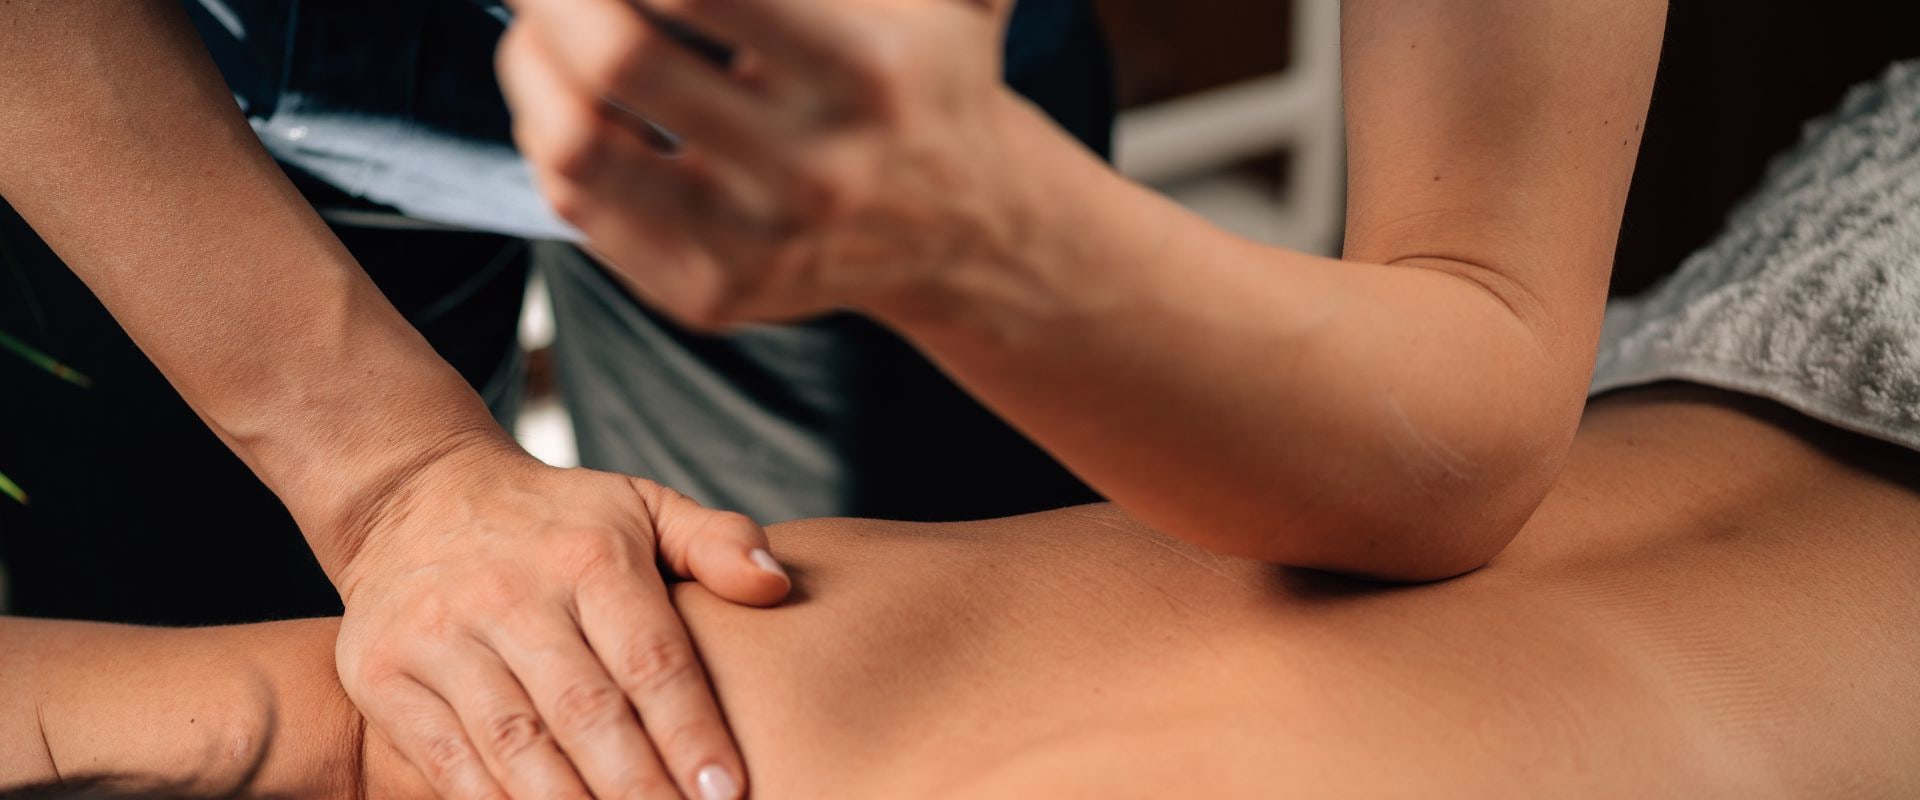 What is the disadvantage of deep tissue massage?